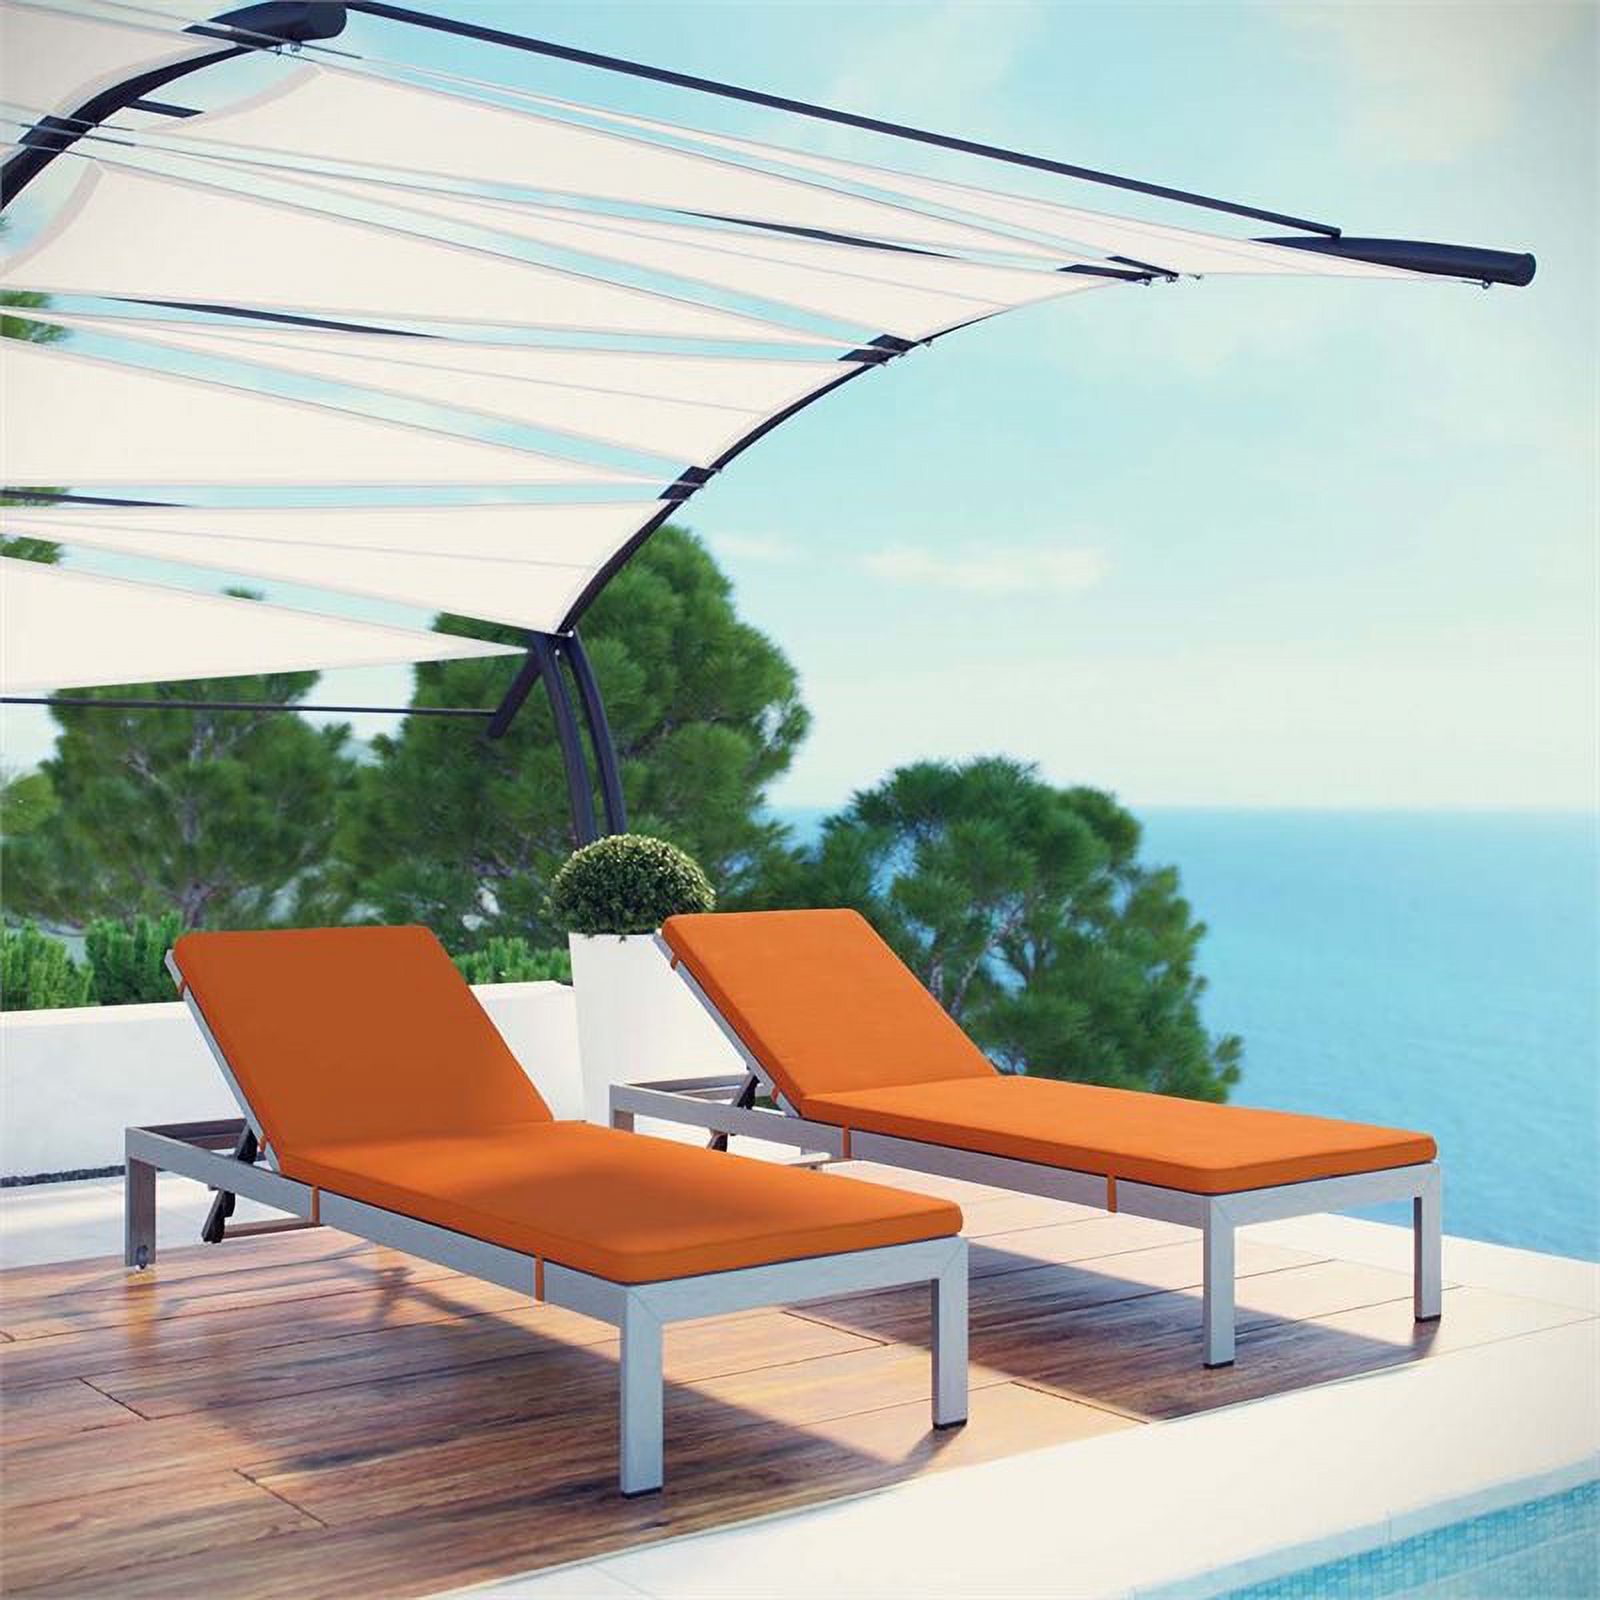 Pemberly Row Modern Fabric Patio Chaise Lounge in Orange (Set of 2) - image 2 of 6